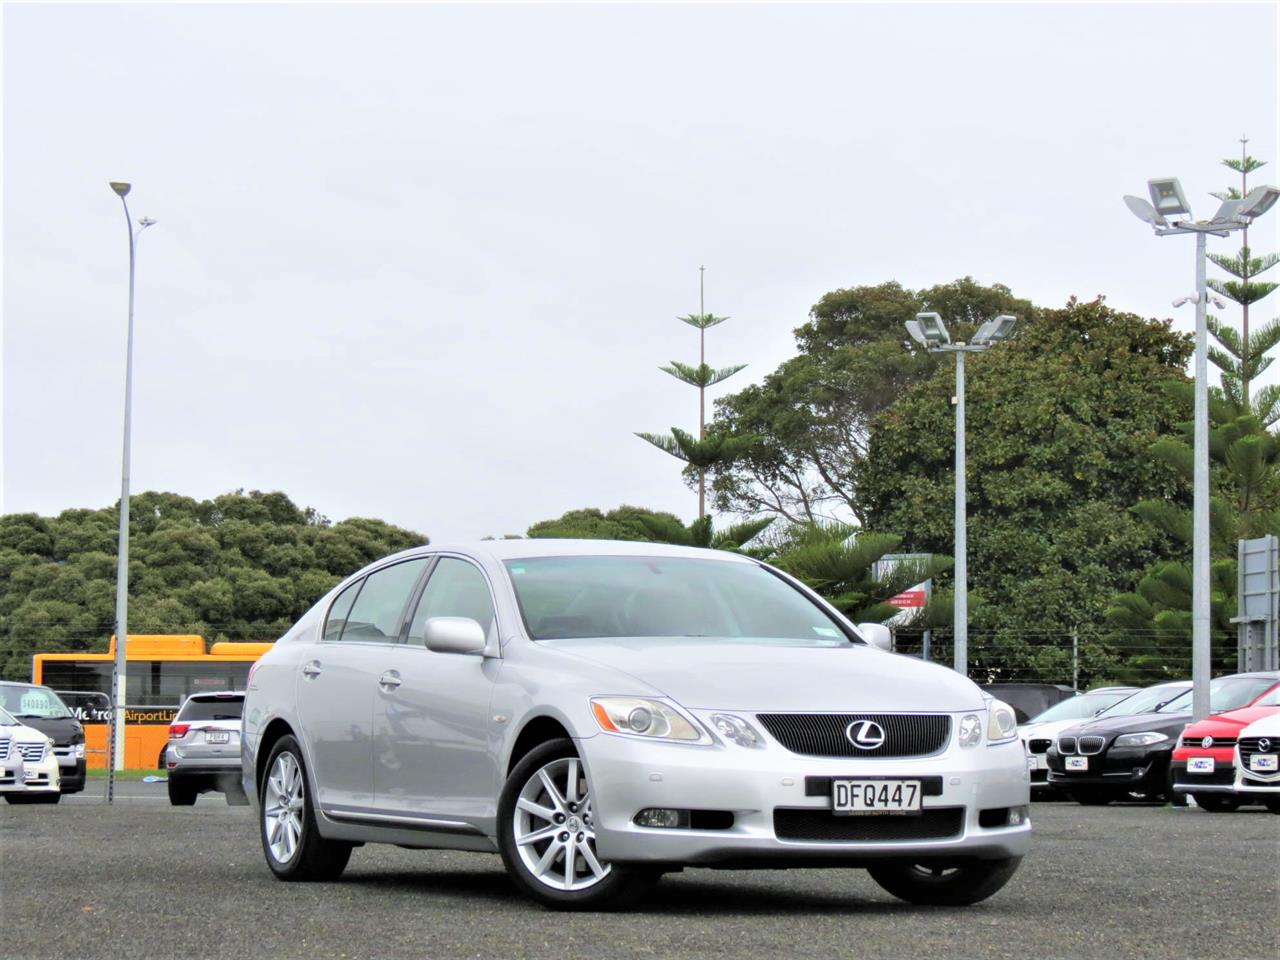 2006 Lexus GS 300 NZ NEW + ONE OWNER SINCE NEW + LEATHER